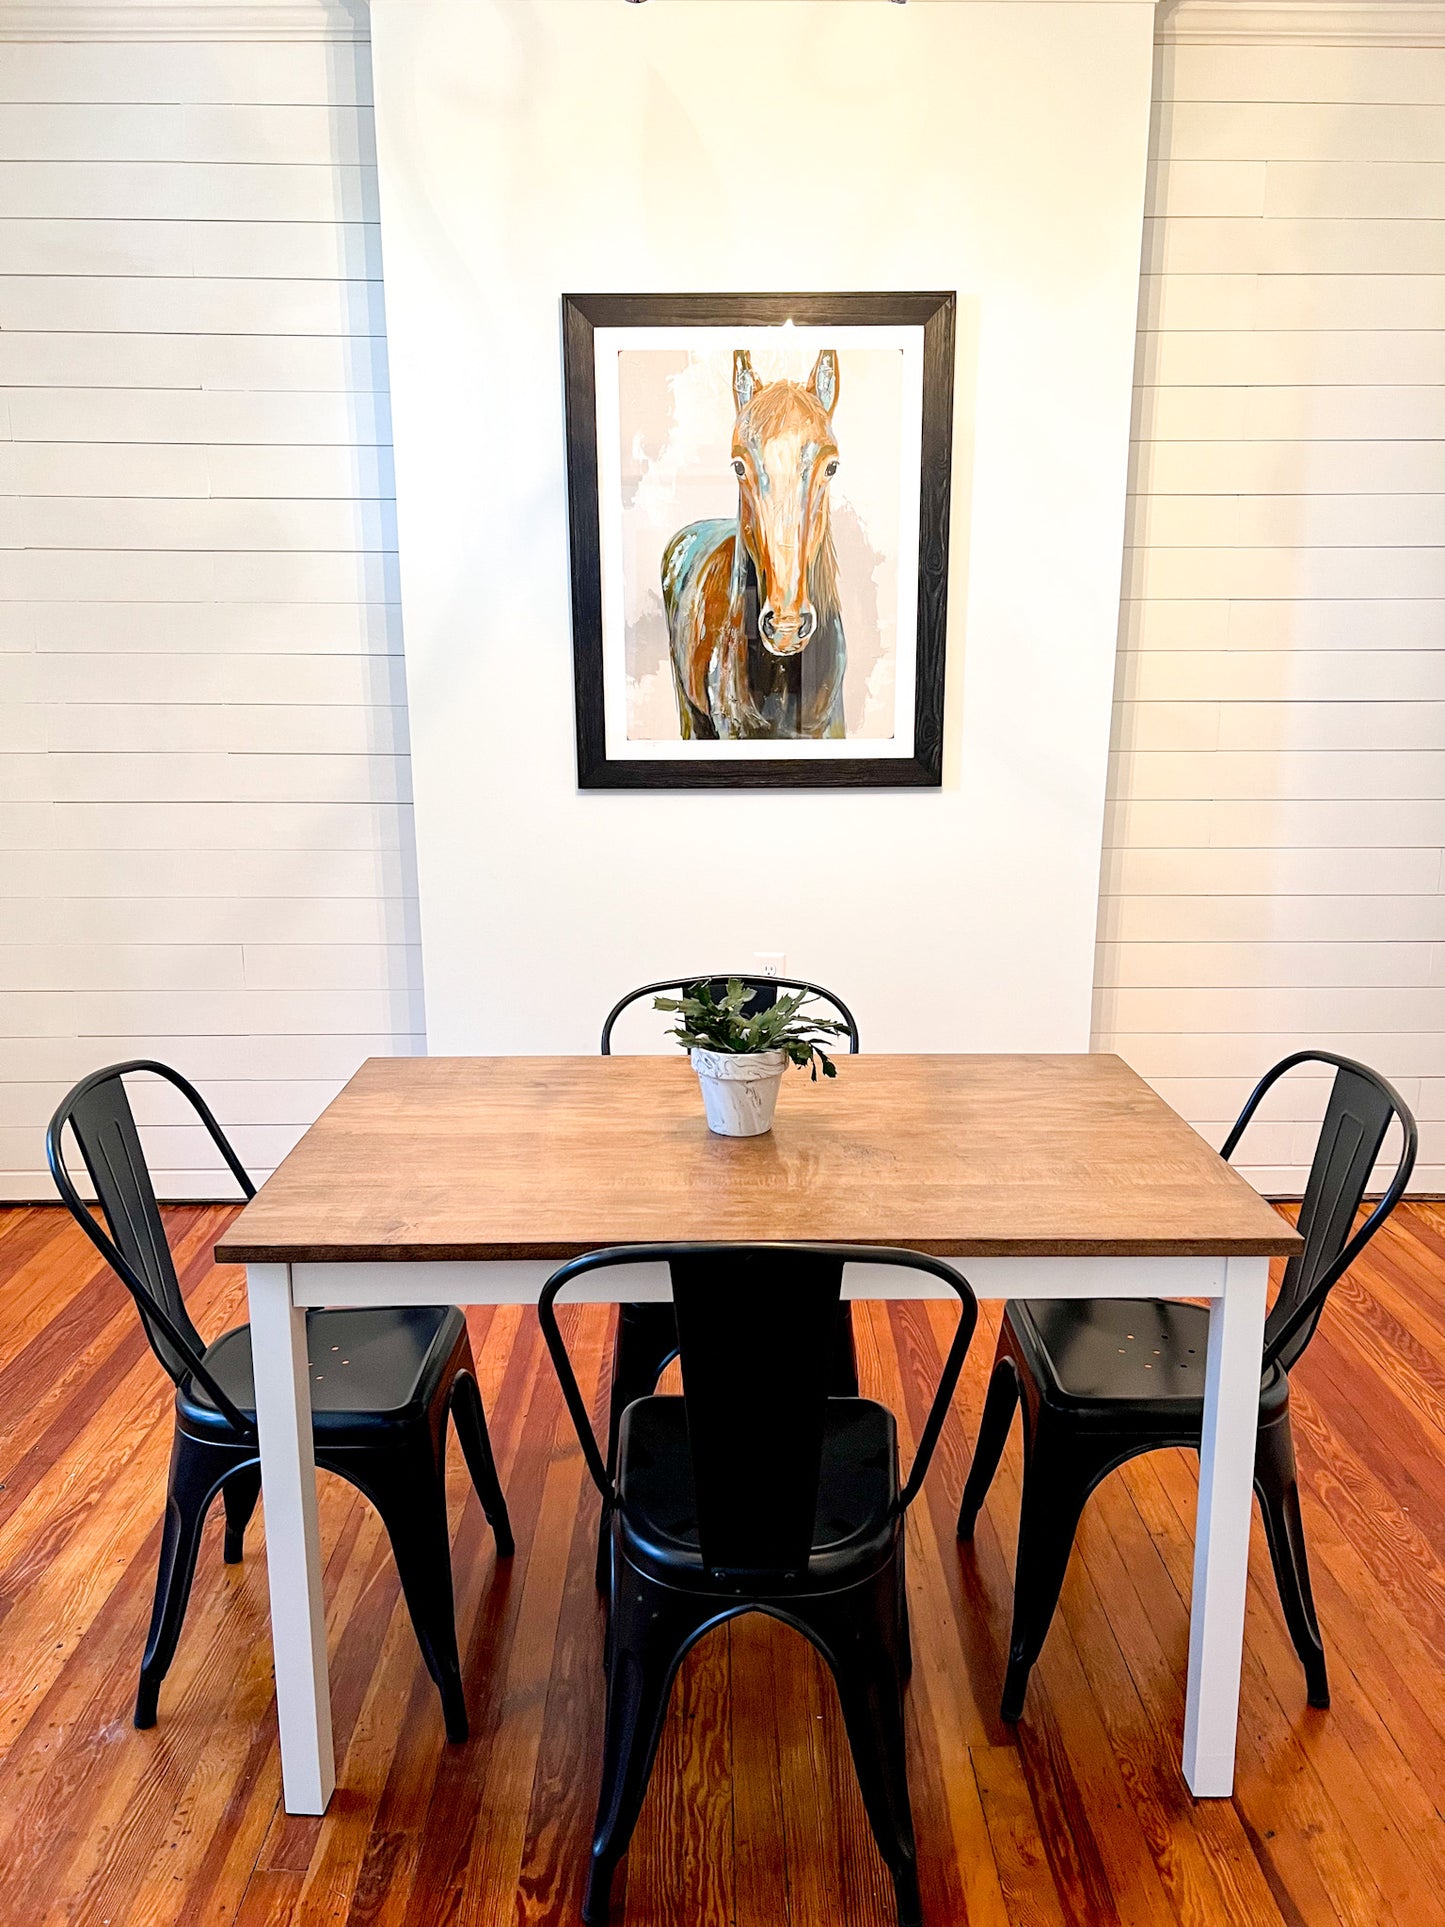 Pictured with a 48" L x 30" W hard maple table with Espresso stain and white painted base. Also pictured with 4 metal dining chairs.